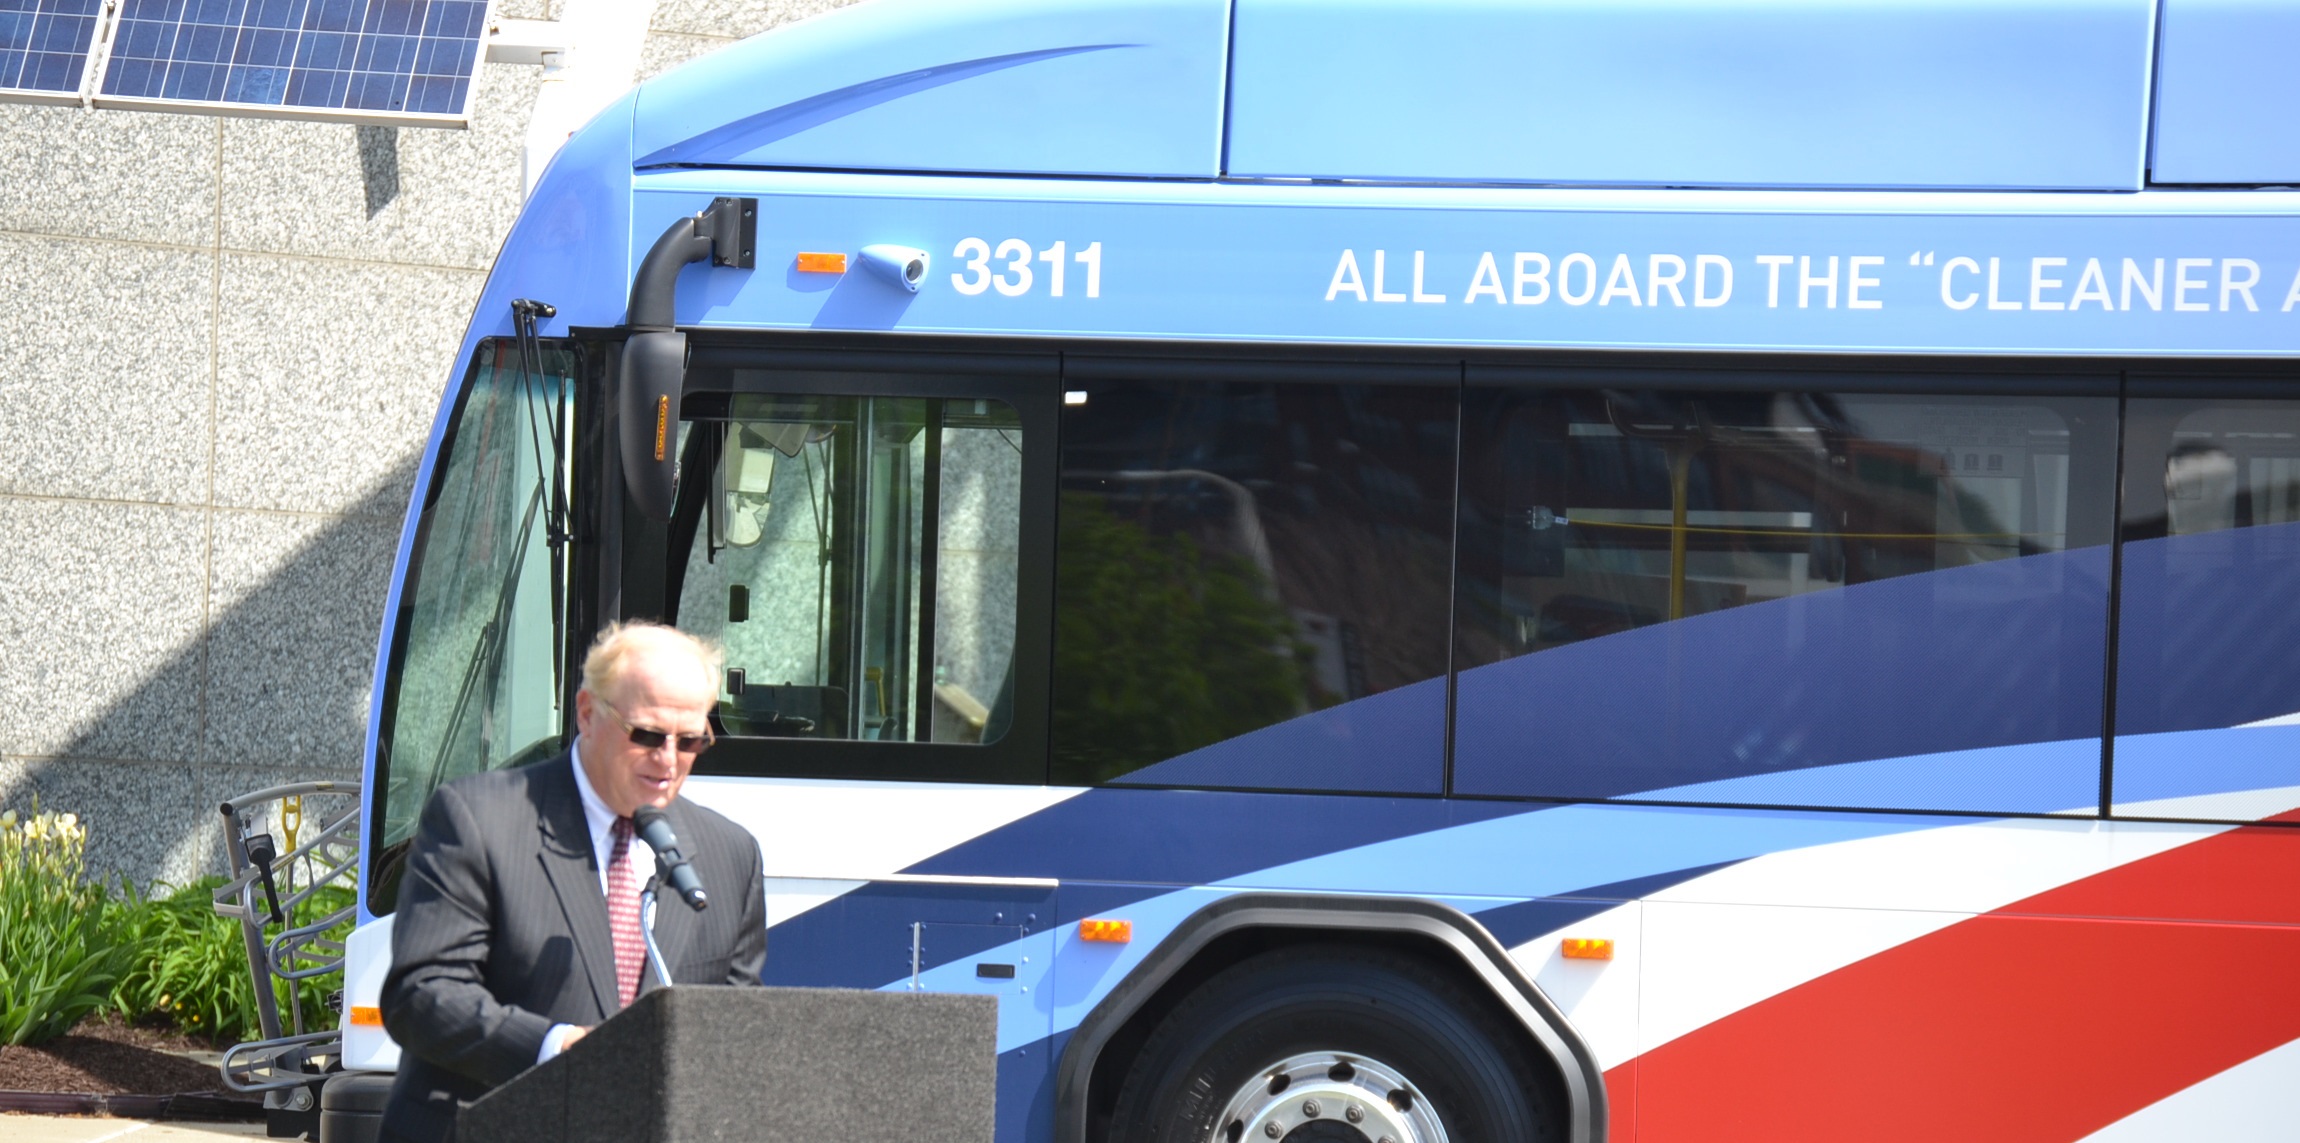  May 19, 2015: RTA adds 60 new CNG buses to its fleet